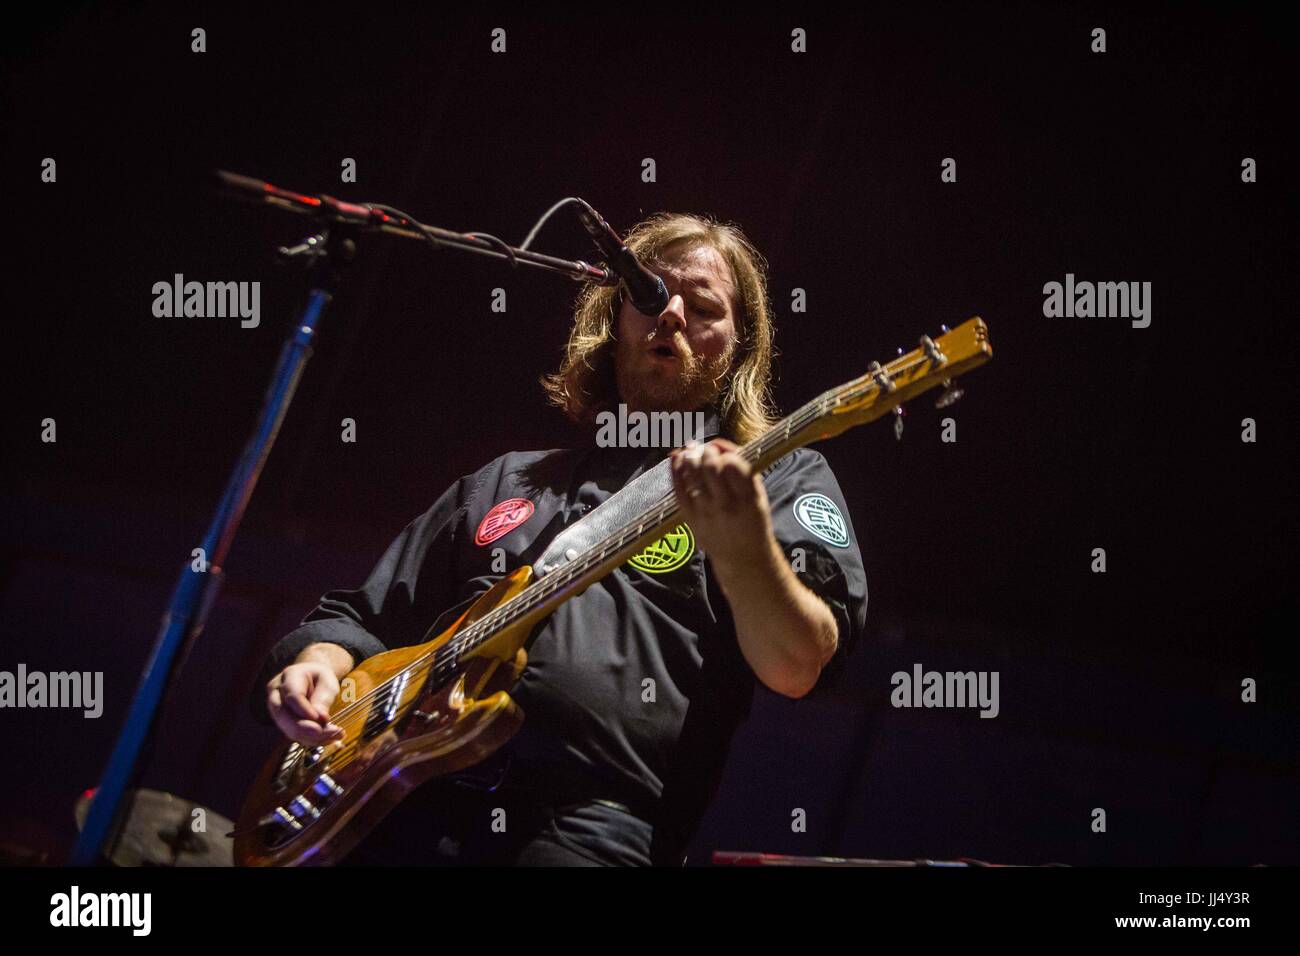 Milan, Italy. 17th July, 2017. Tim Kingsbury of the canadian indie rock band Arcade Fire pictured on stage as they perform at Milano Summer Festival, Ippodromo San Siro Milan. Credit: Roberto Finizio/Pacific Press/Alamy Live News Stock Photo